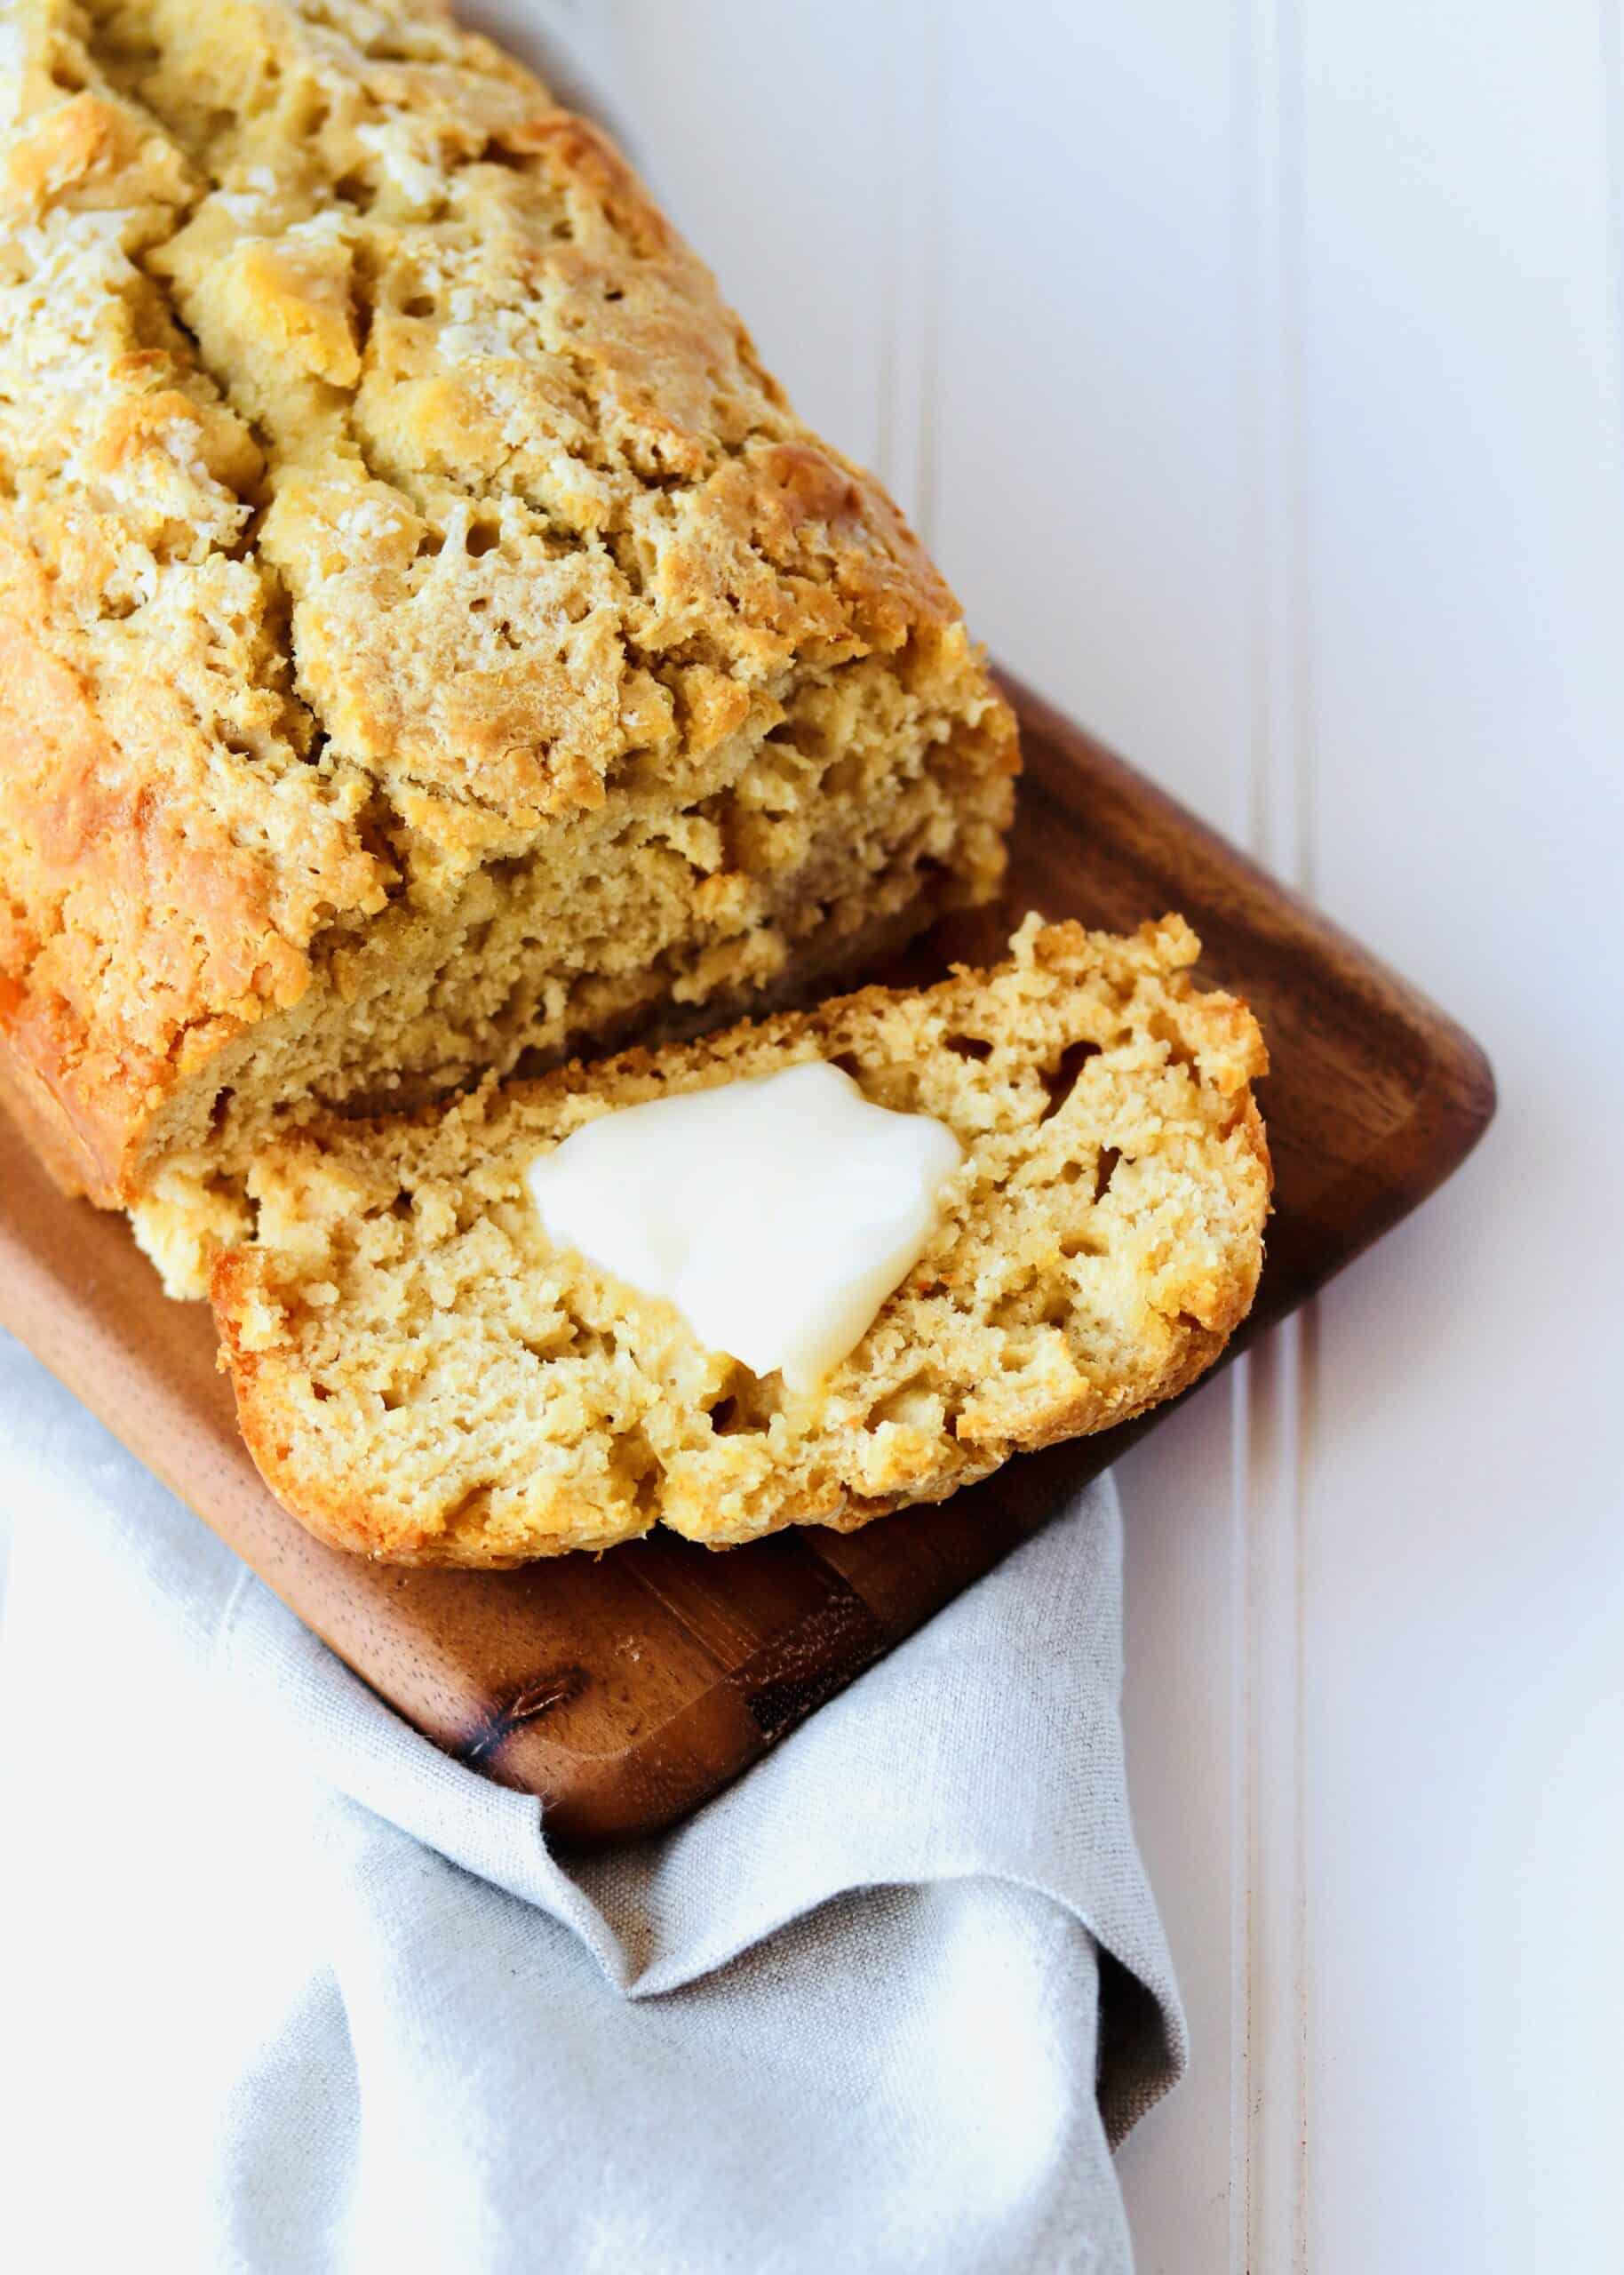 Honey Beer Bread is a super simple quick bread. Just 5 ingredients! The beer flavor is very mild and the bread is dense, moist, and ready for a slather of butter and drizzle of honey.